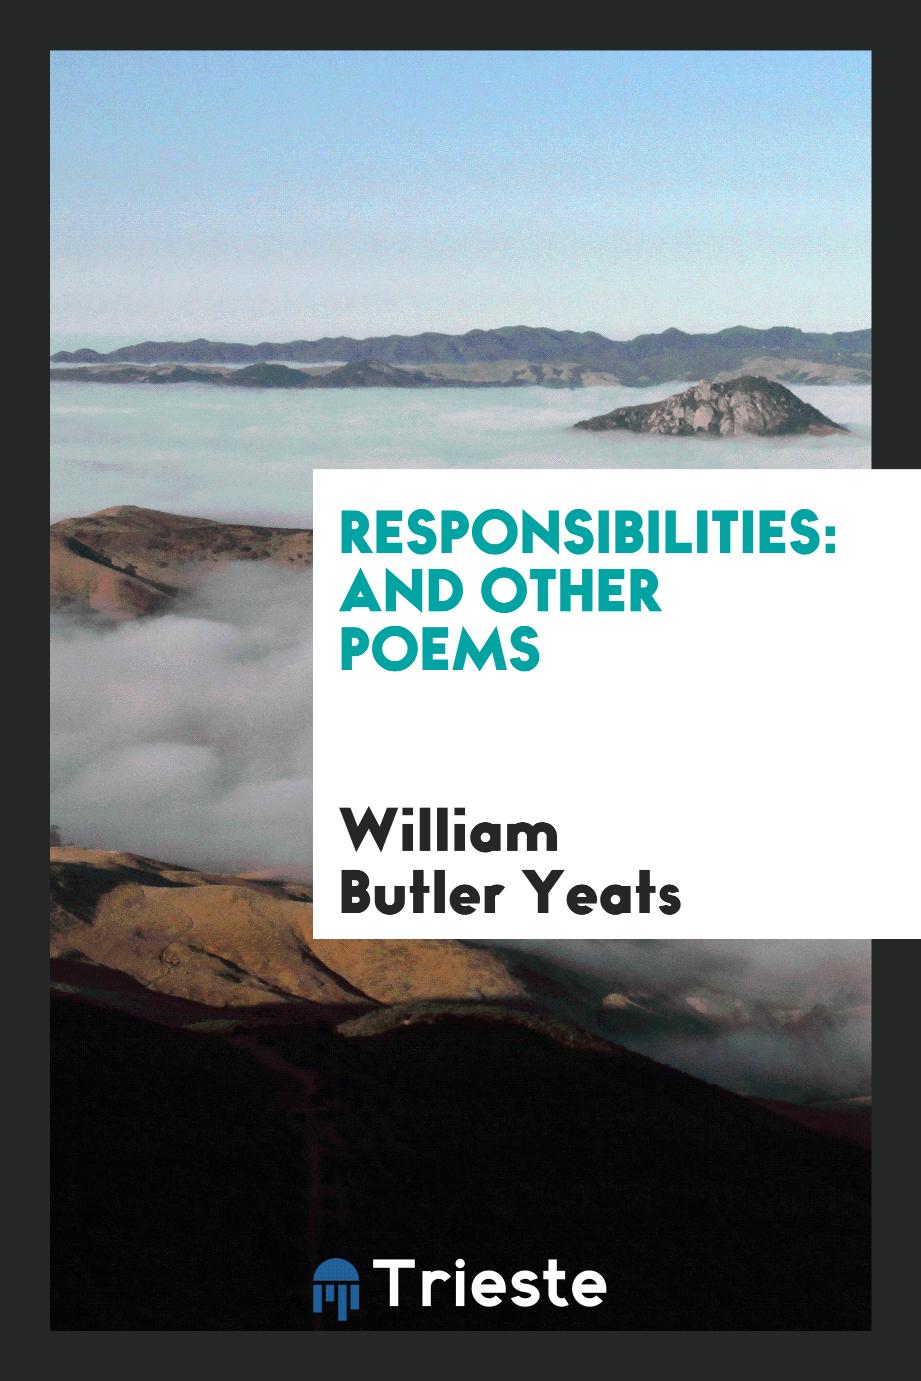 Responsibilities: and other poems